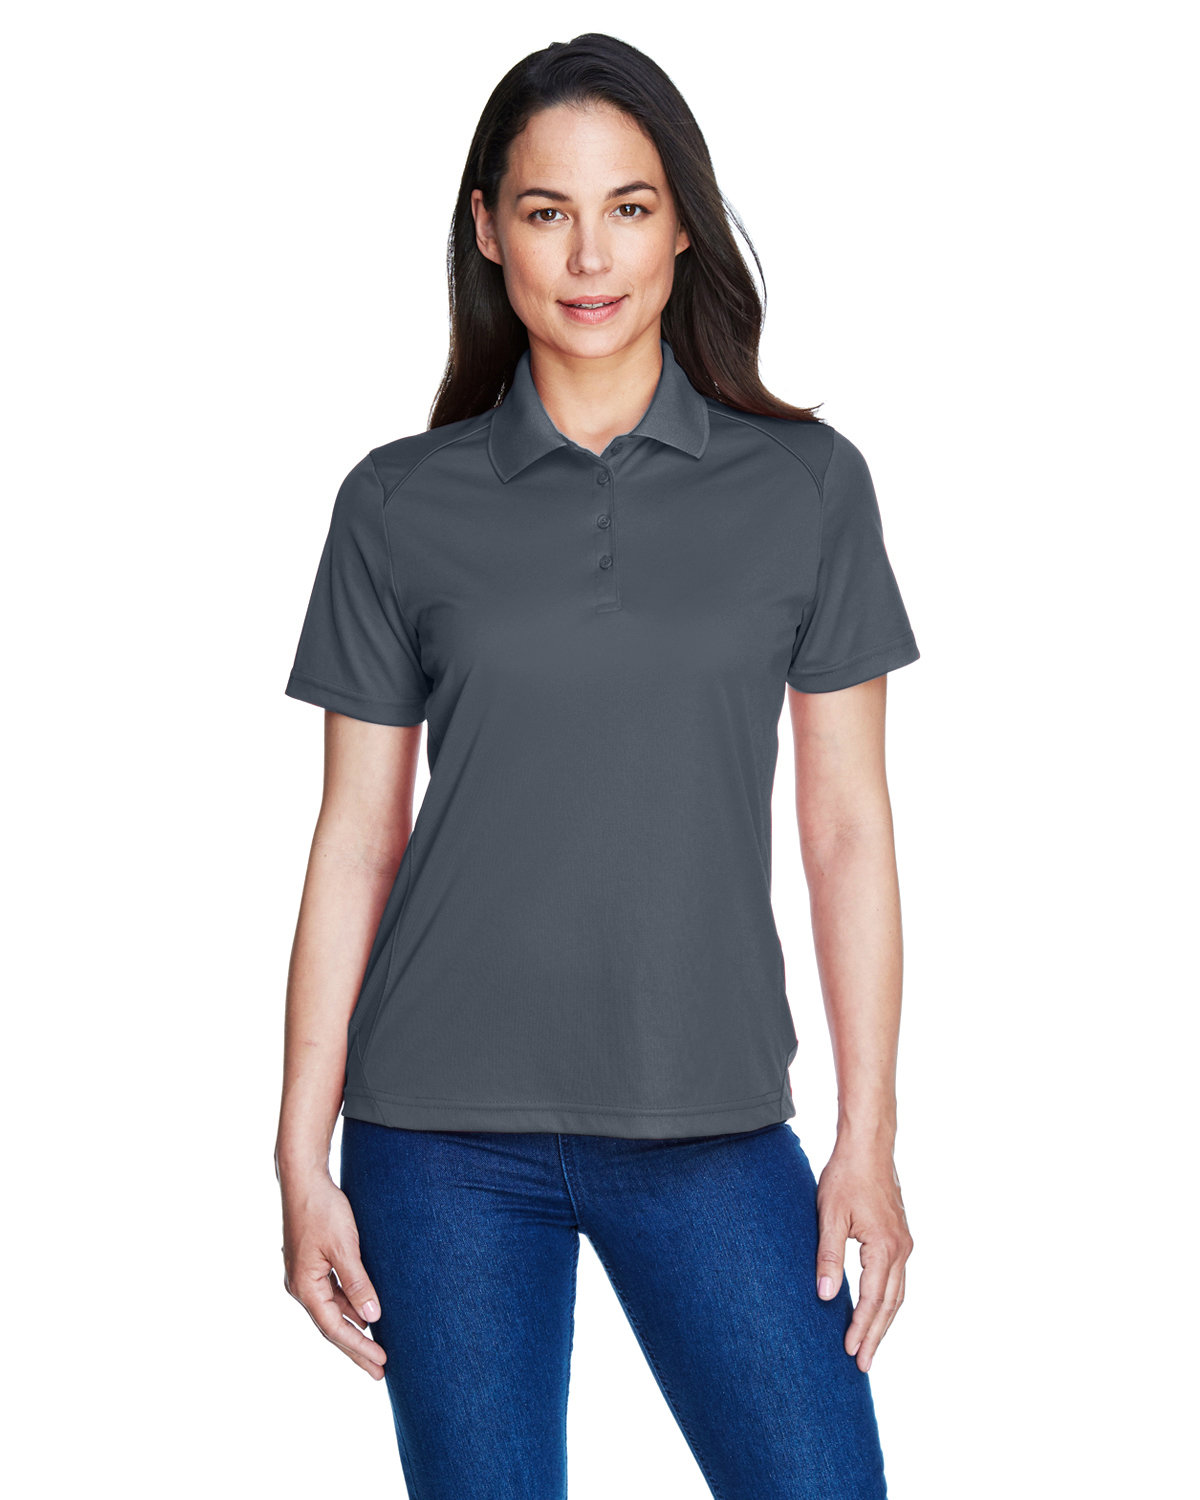 Extreme Ladies' Eperformance™ Shield Snag Protection Short-Sleeve Polo CARBON 